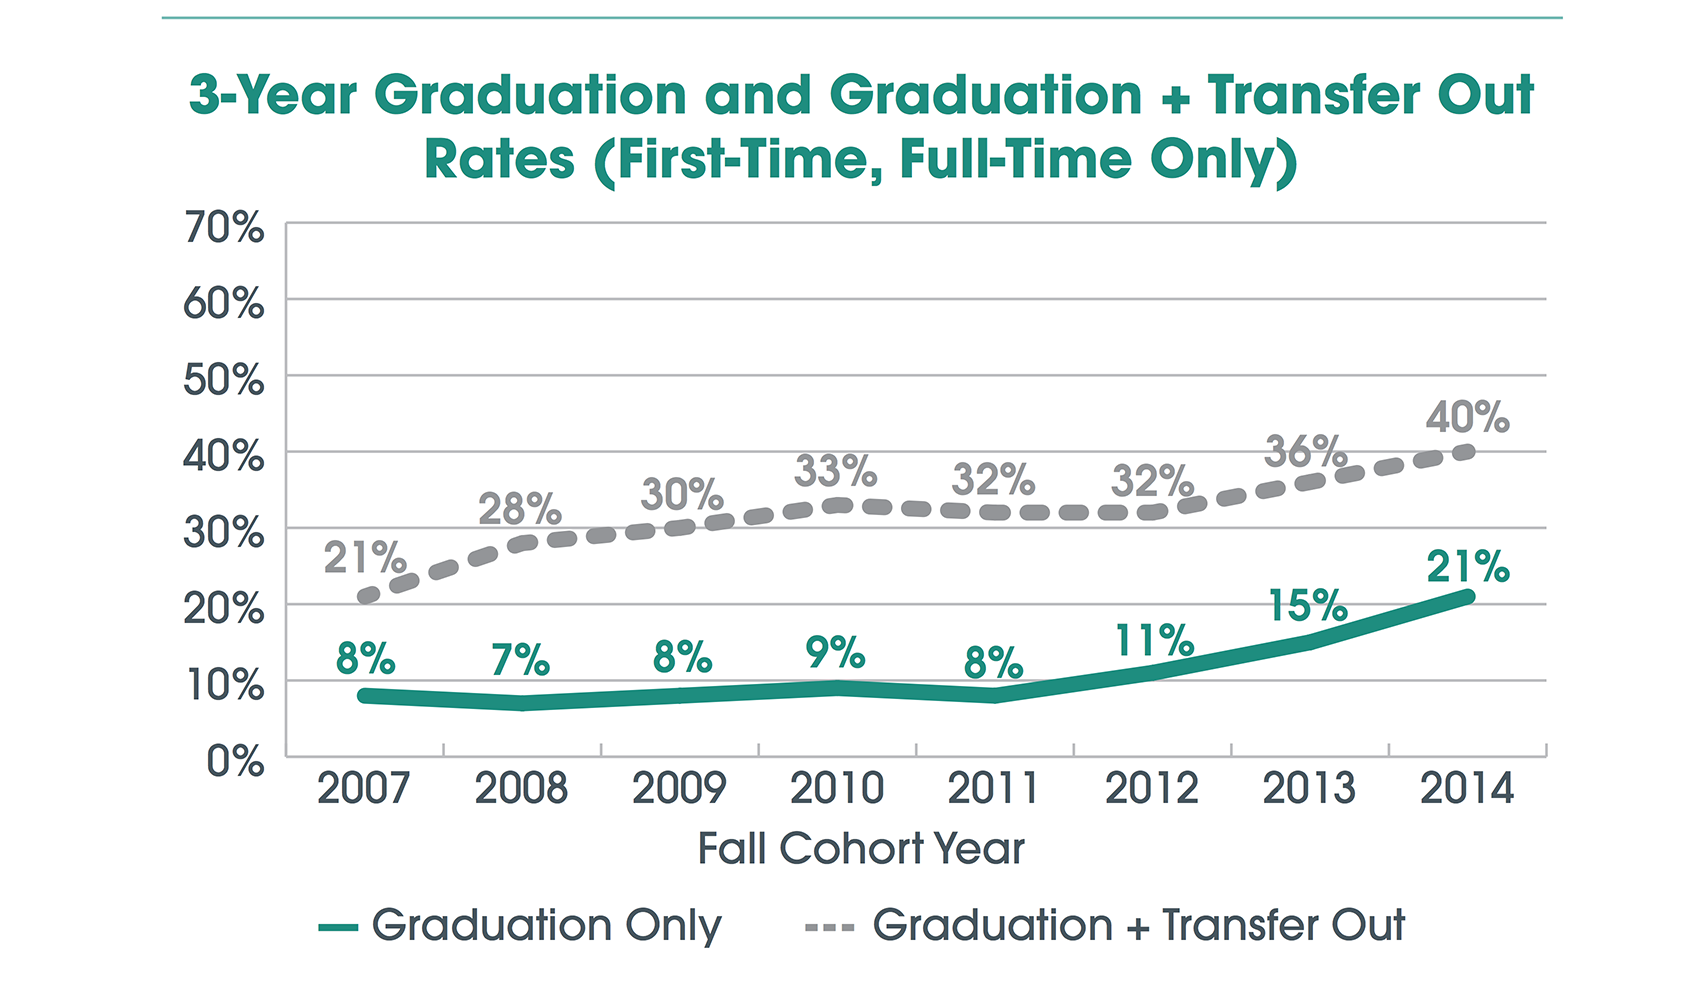 
Graduation and Transfer Out Rates
